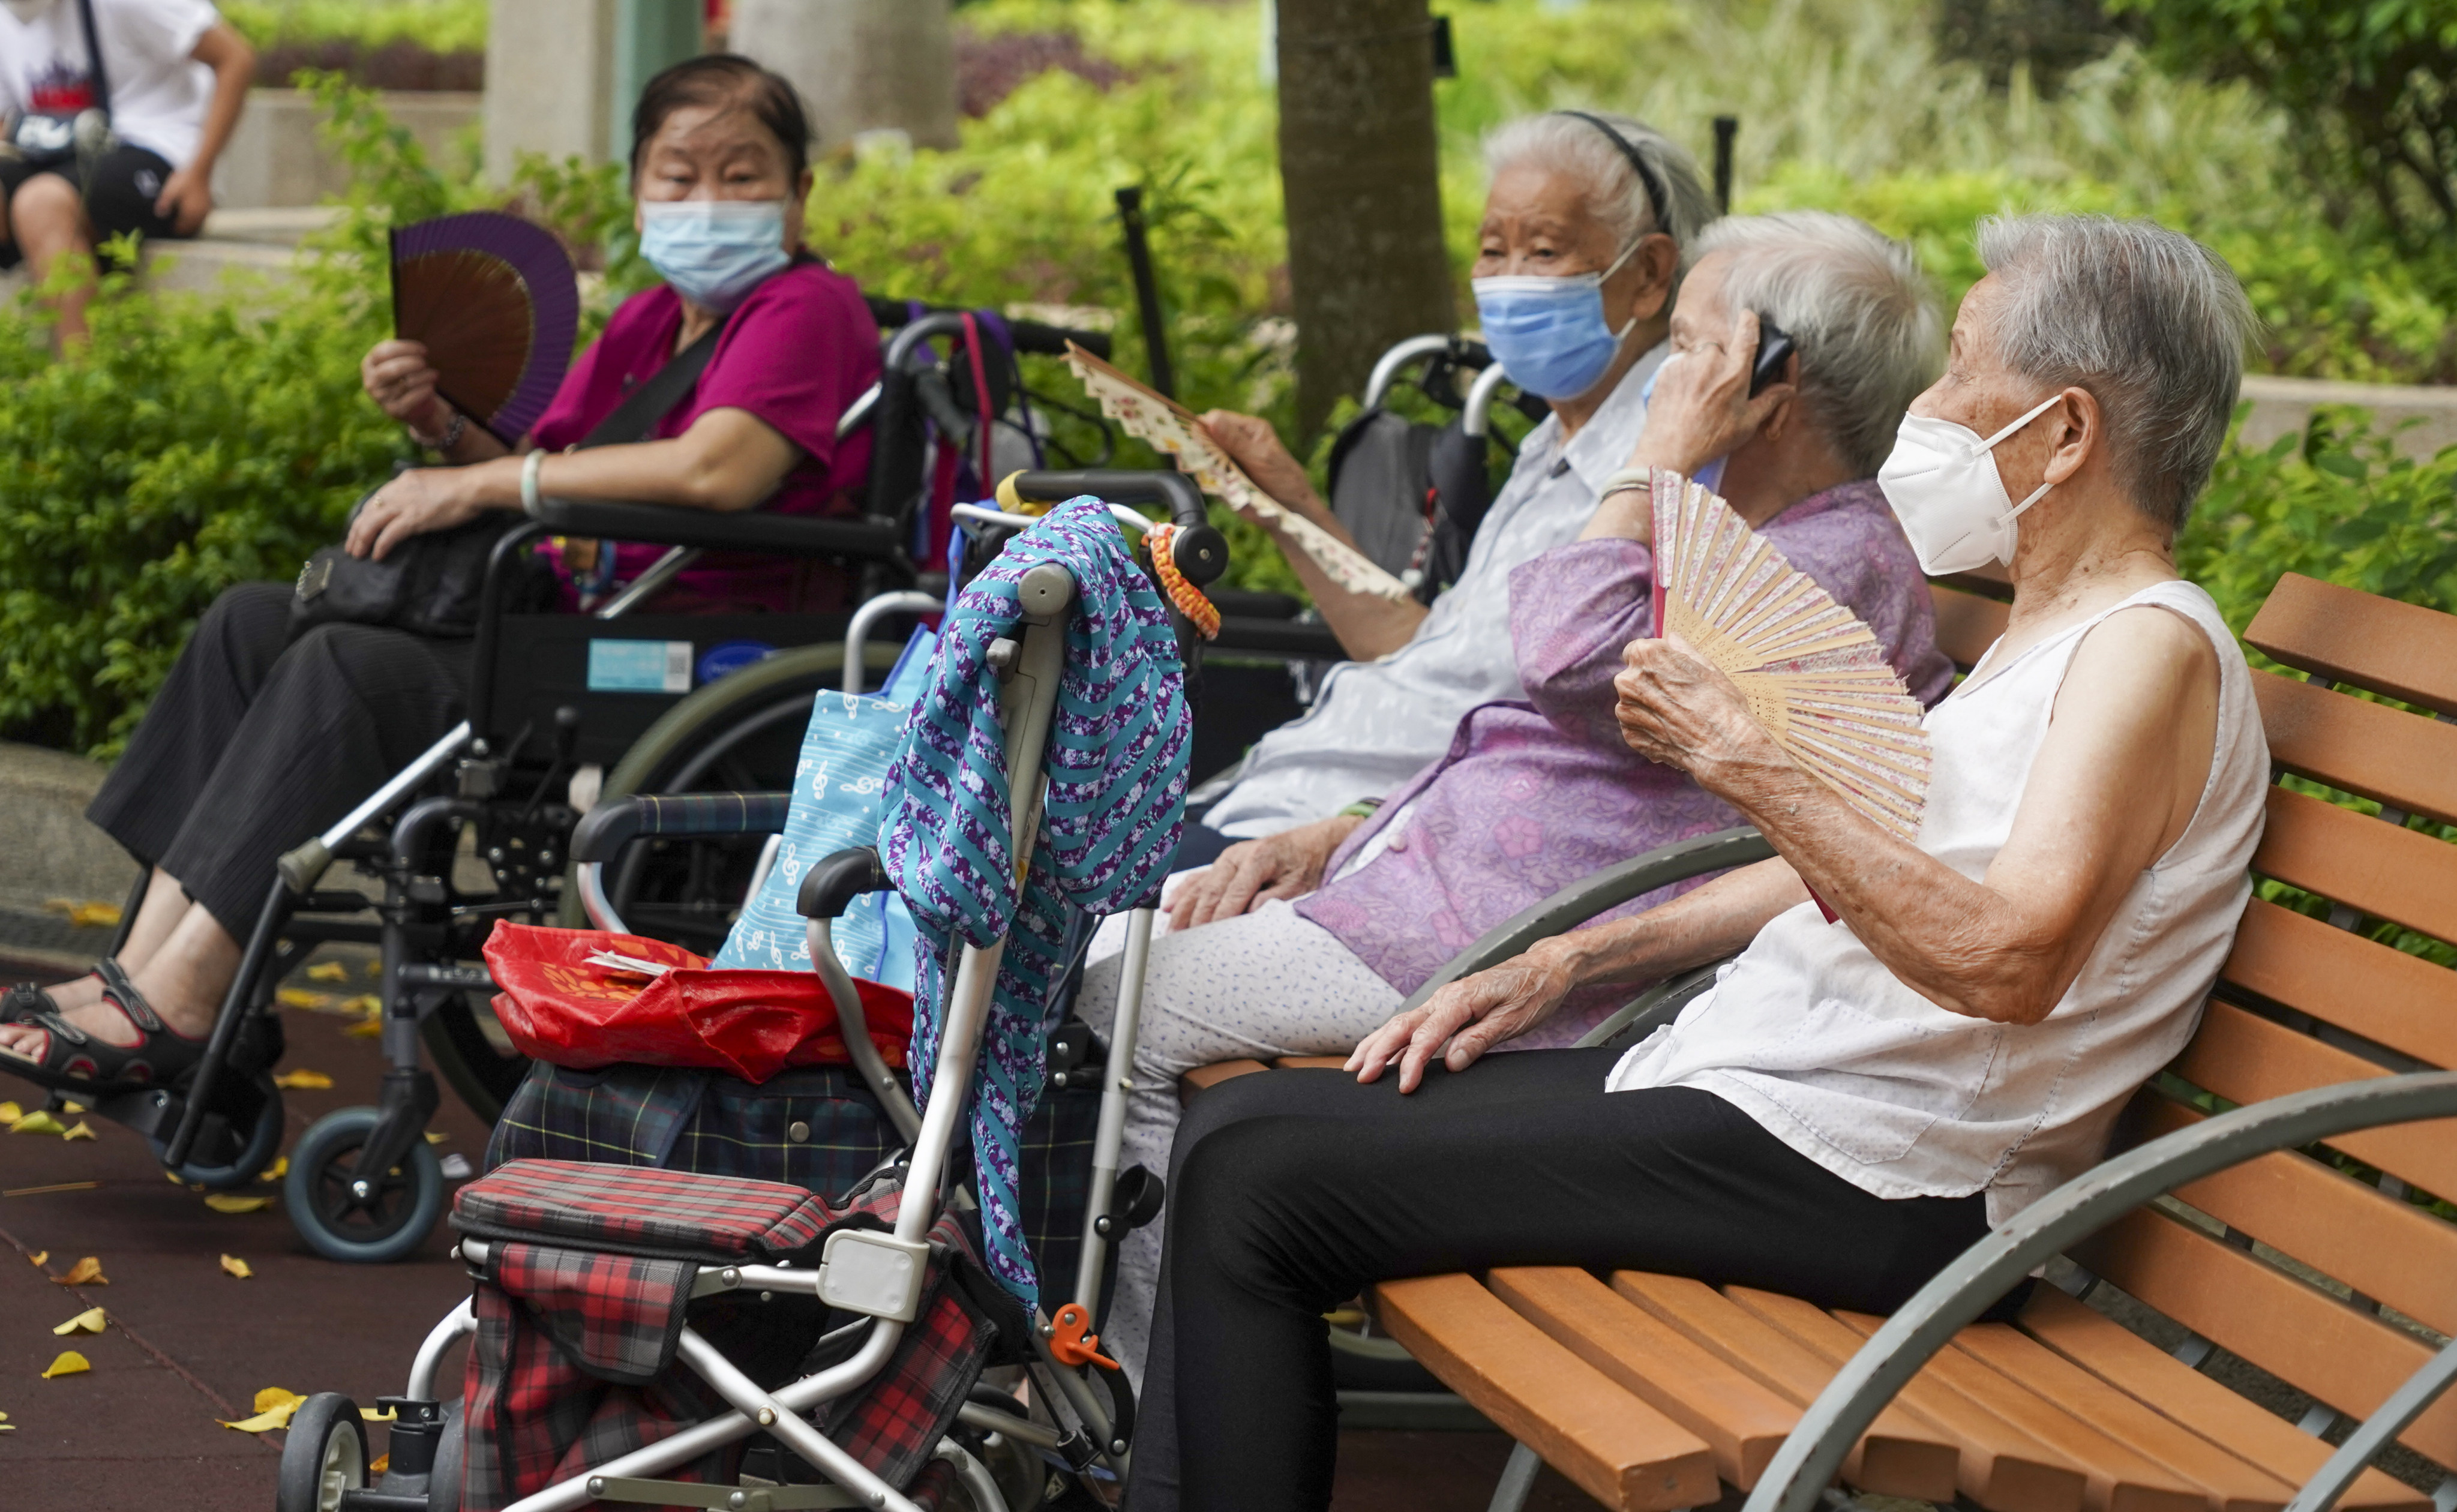 The healthcare voucher scheme, introduced in 2009, provides everyone aged 65 or older with HK$2,000 to pay for primary healthcare services in the private sector. Photo: Felix Wong